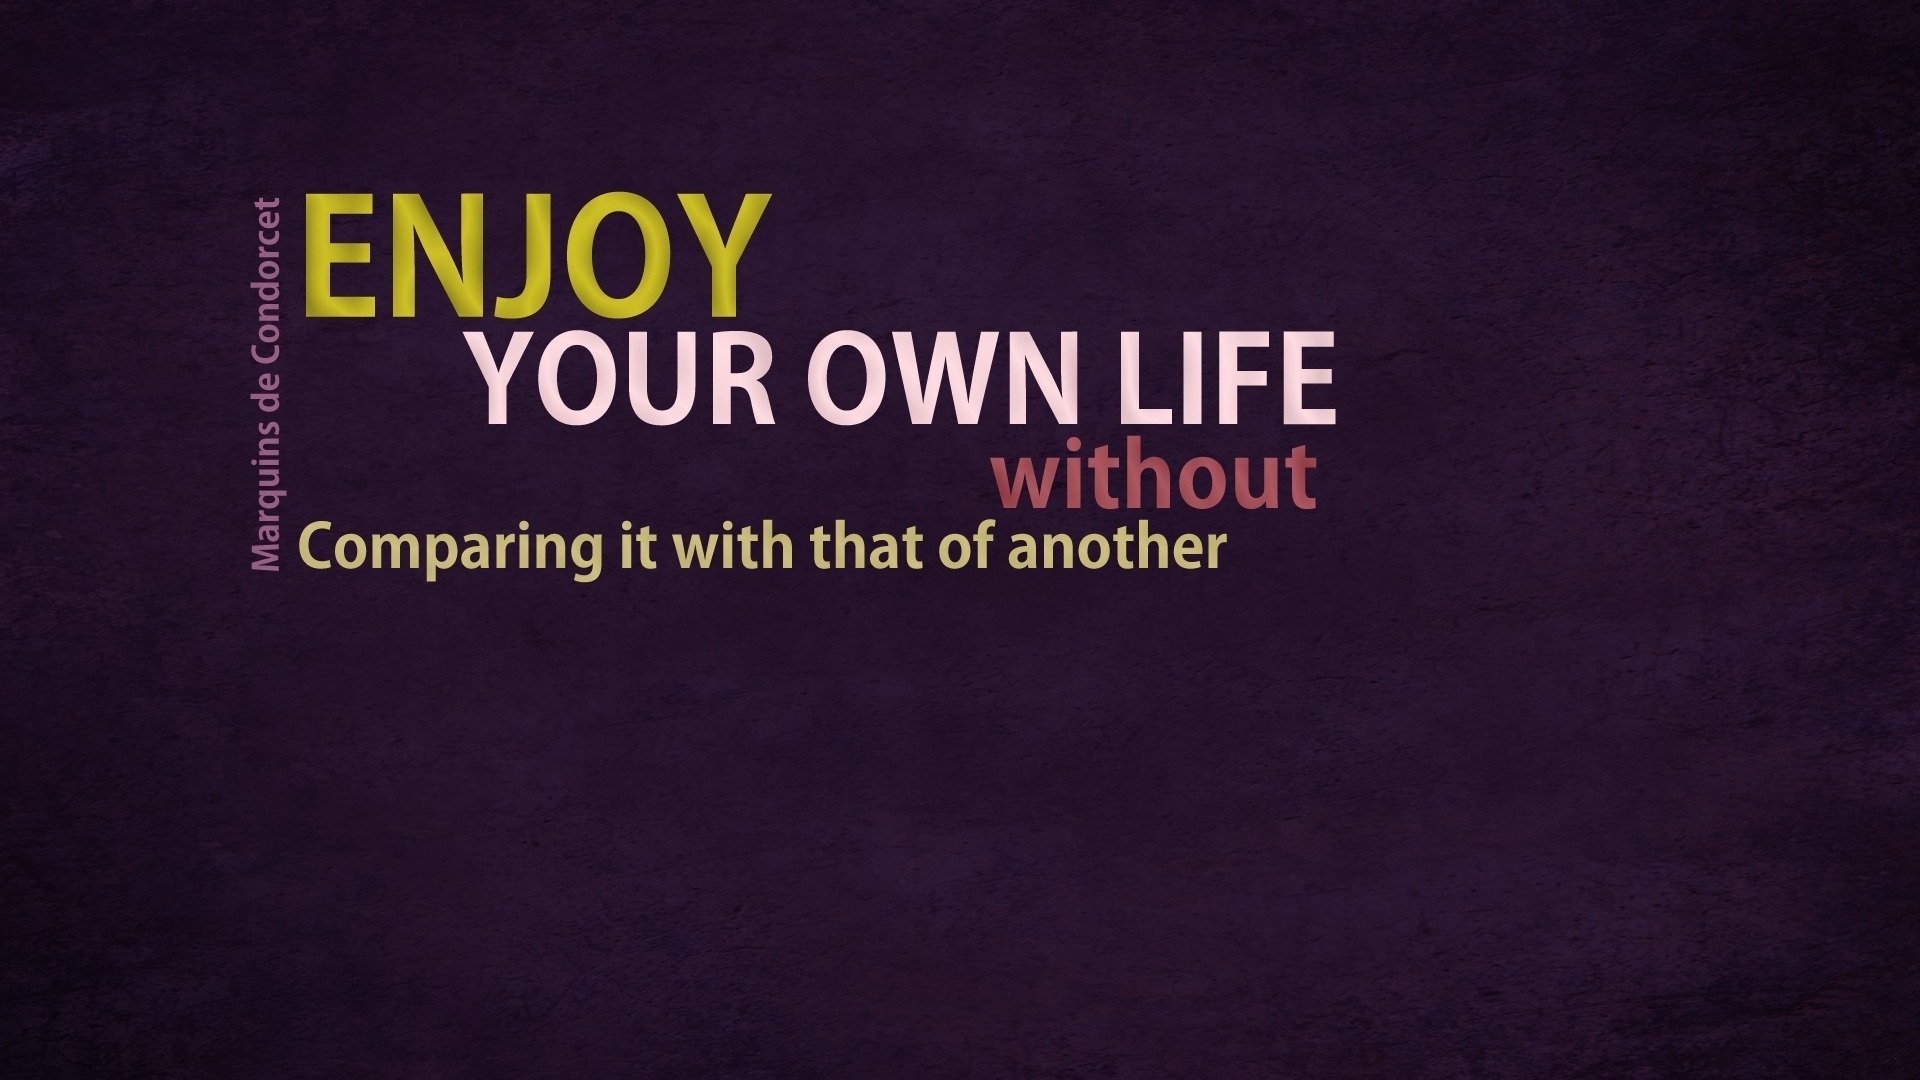 Enjoy Your Life Quote for 1920 x 1080 HDTV 1080p resolution